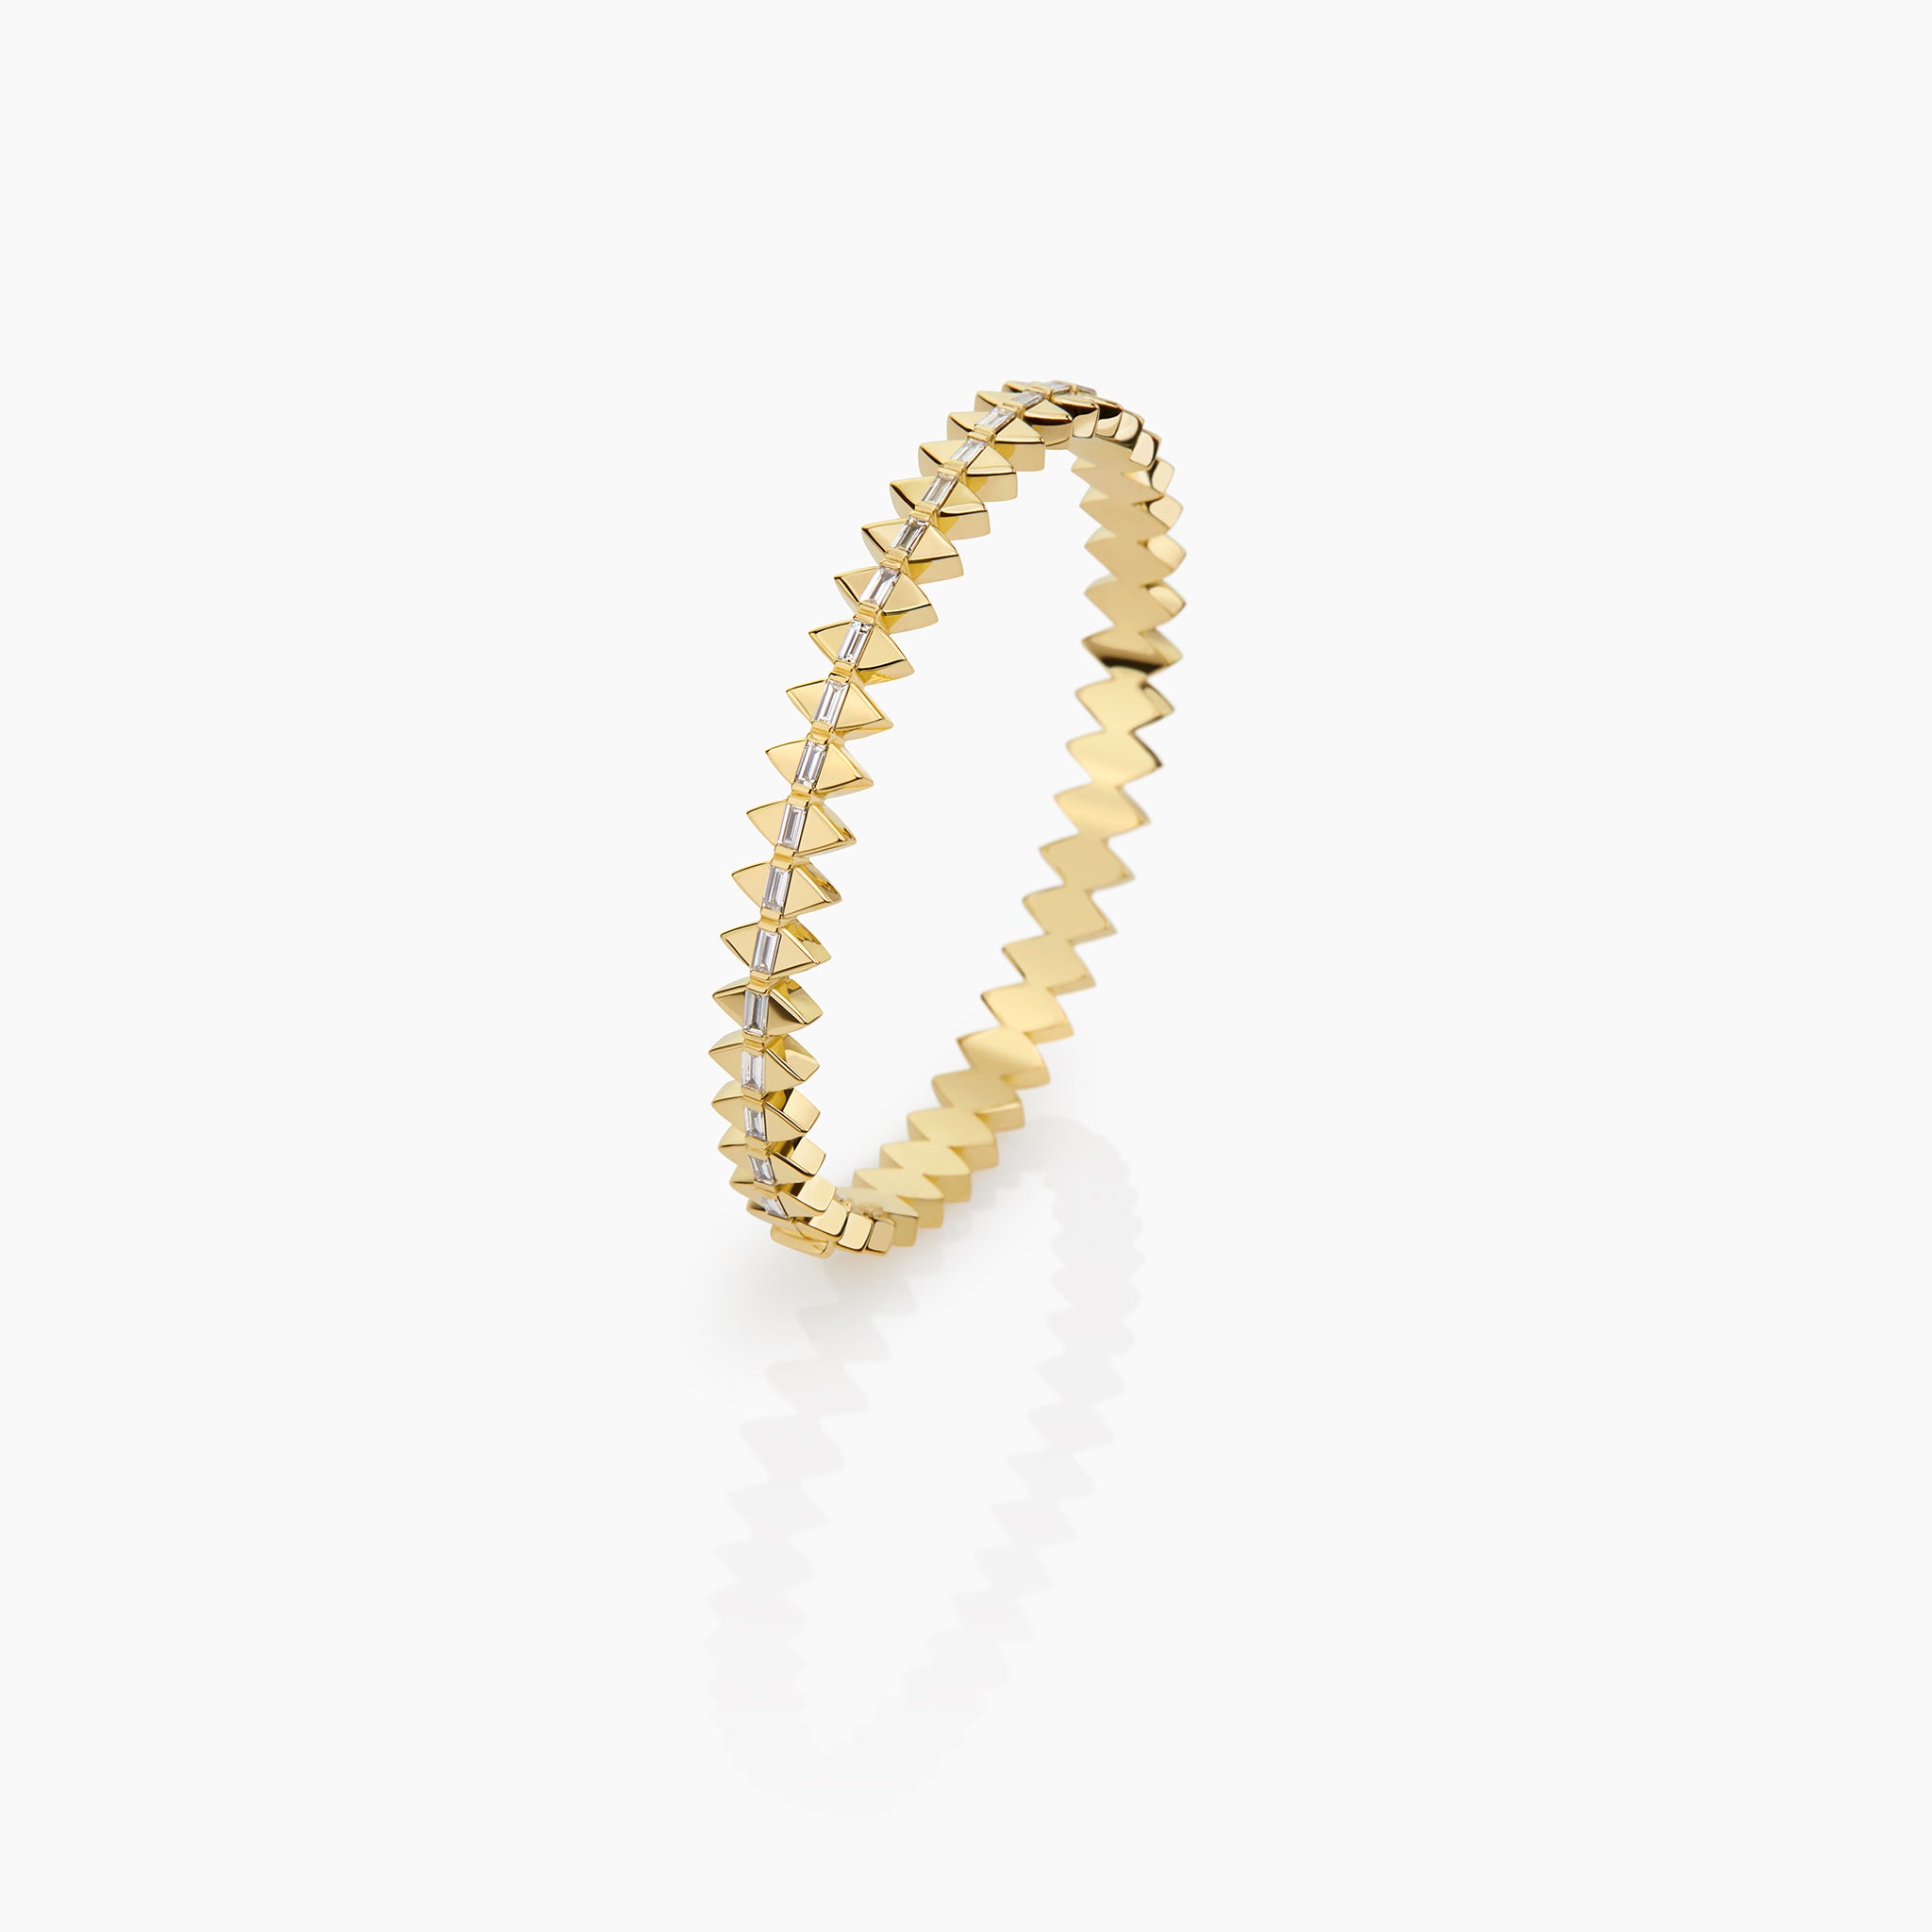 Solidarity bangle in yellow gold featuring diamond baguettes displayed against an off white background. 